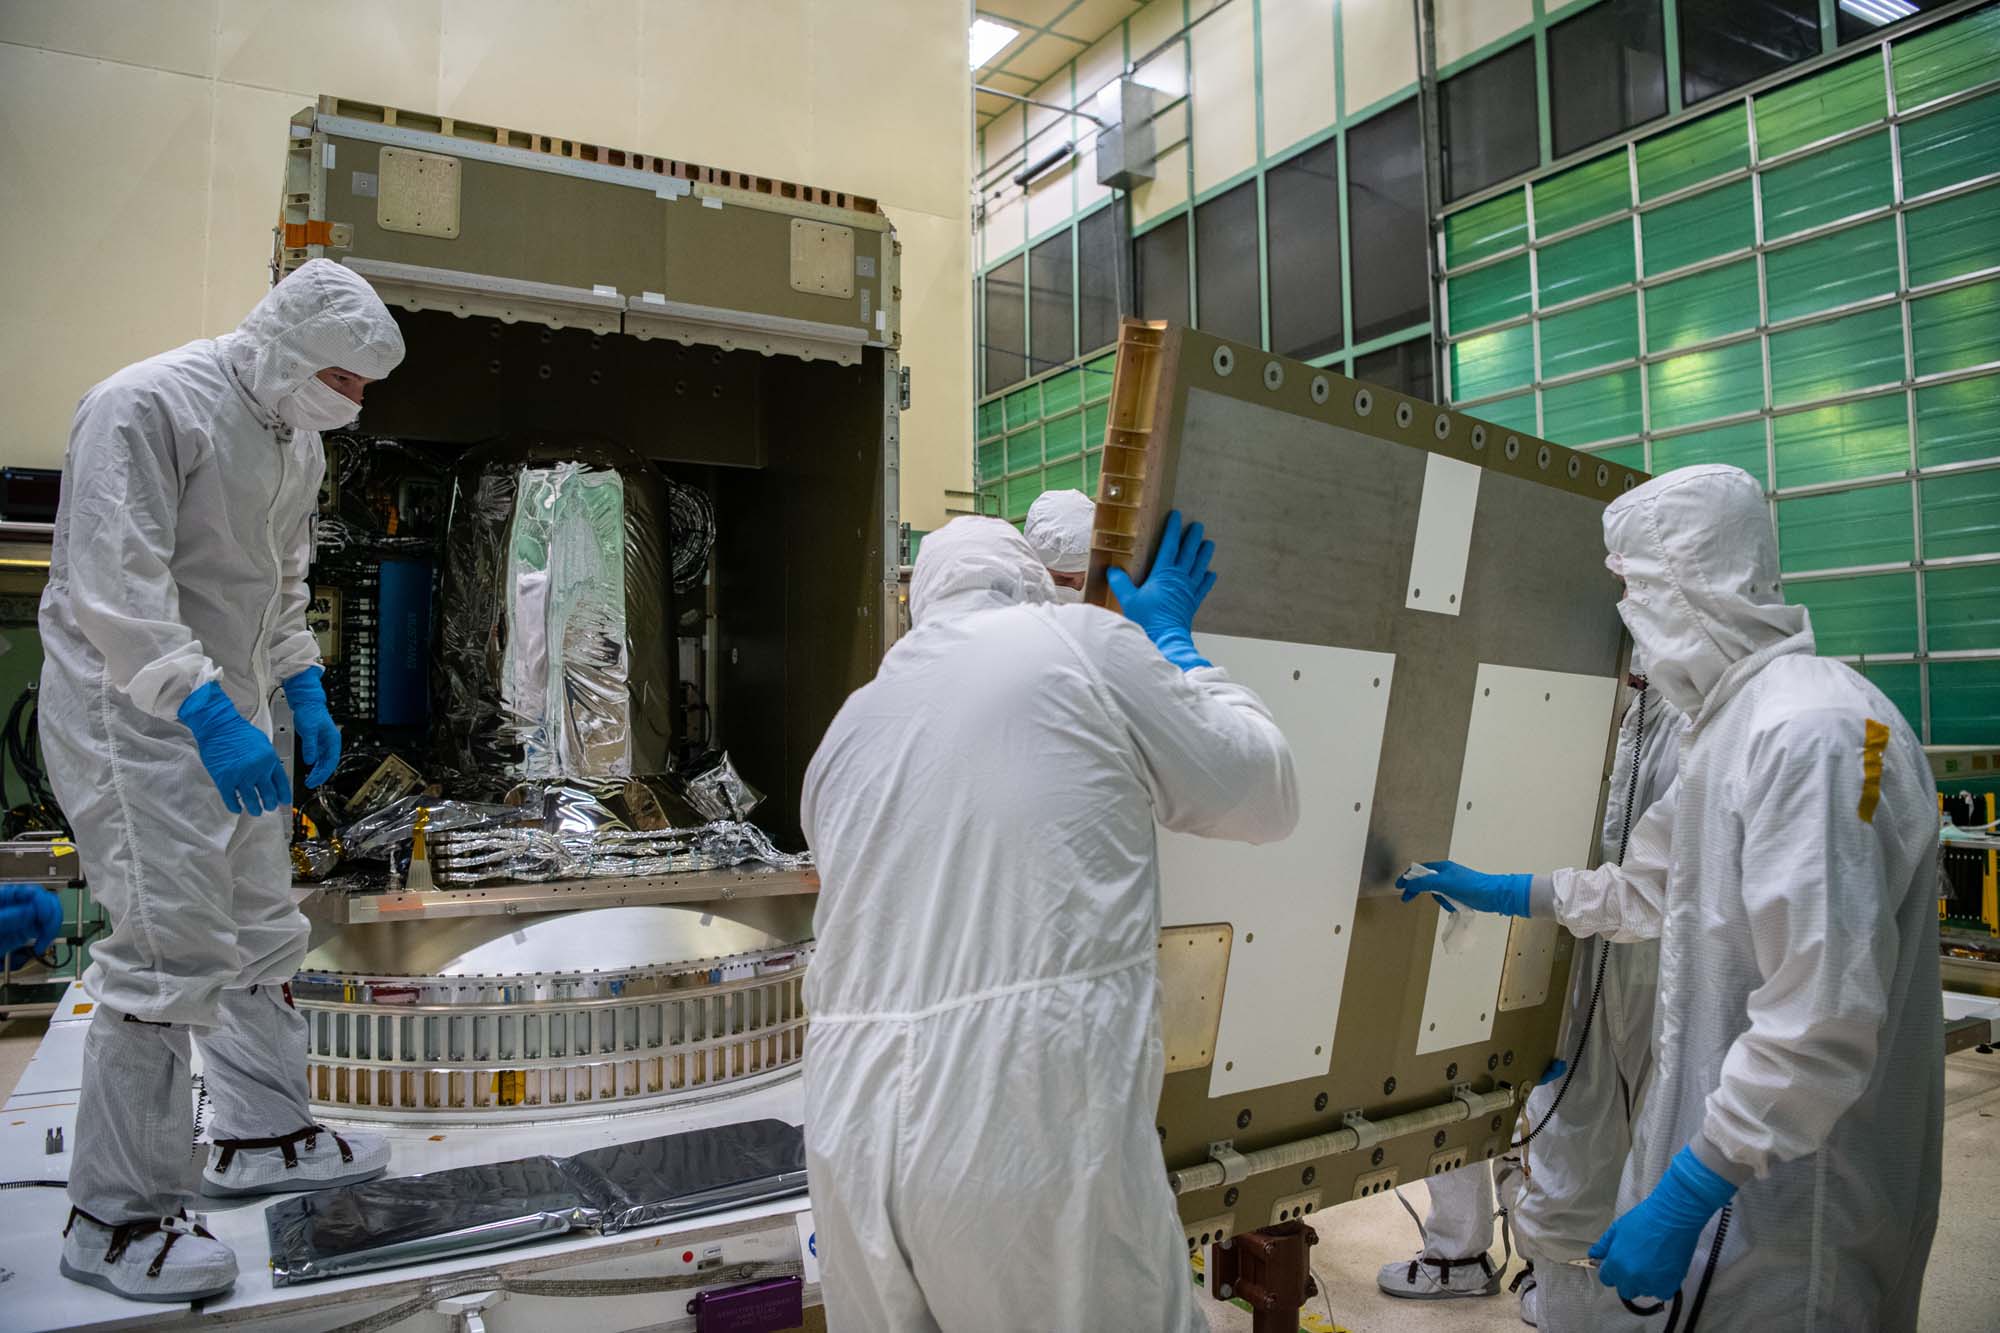 Panel (-Y) being installed on the spacecraft structure.